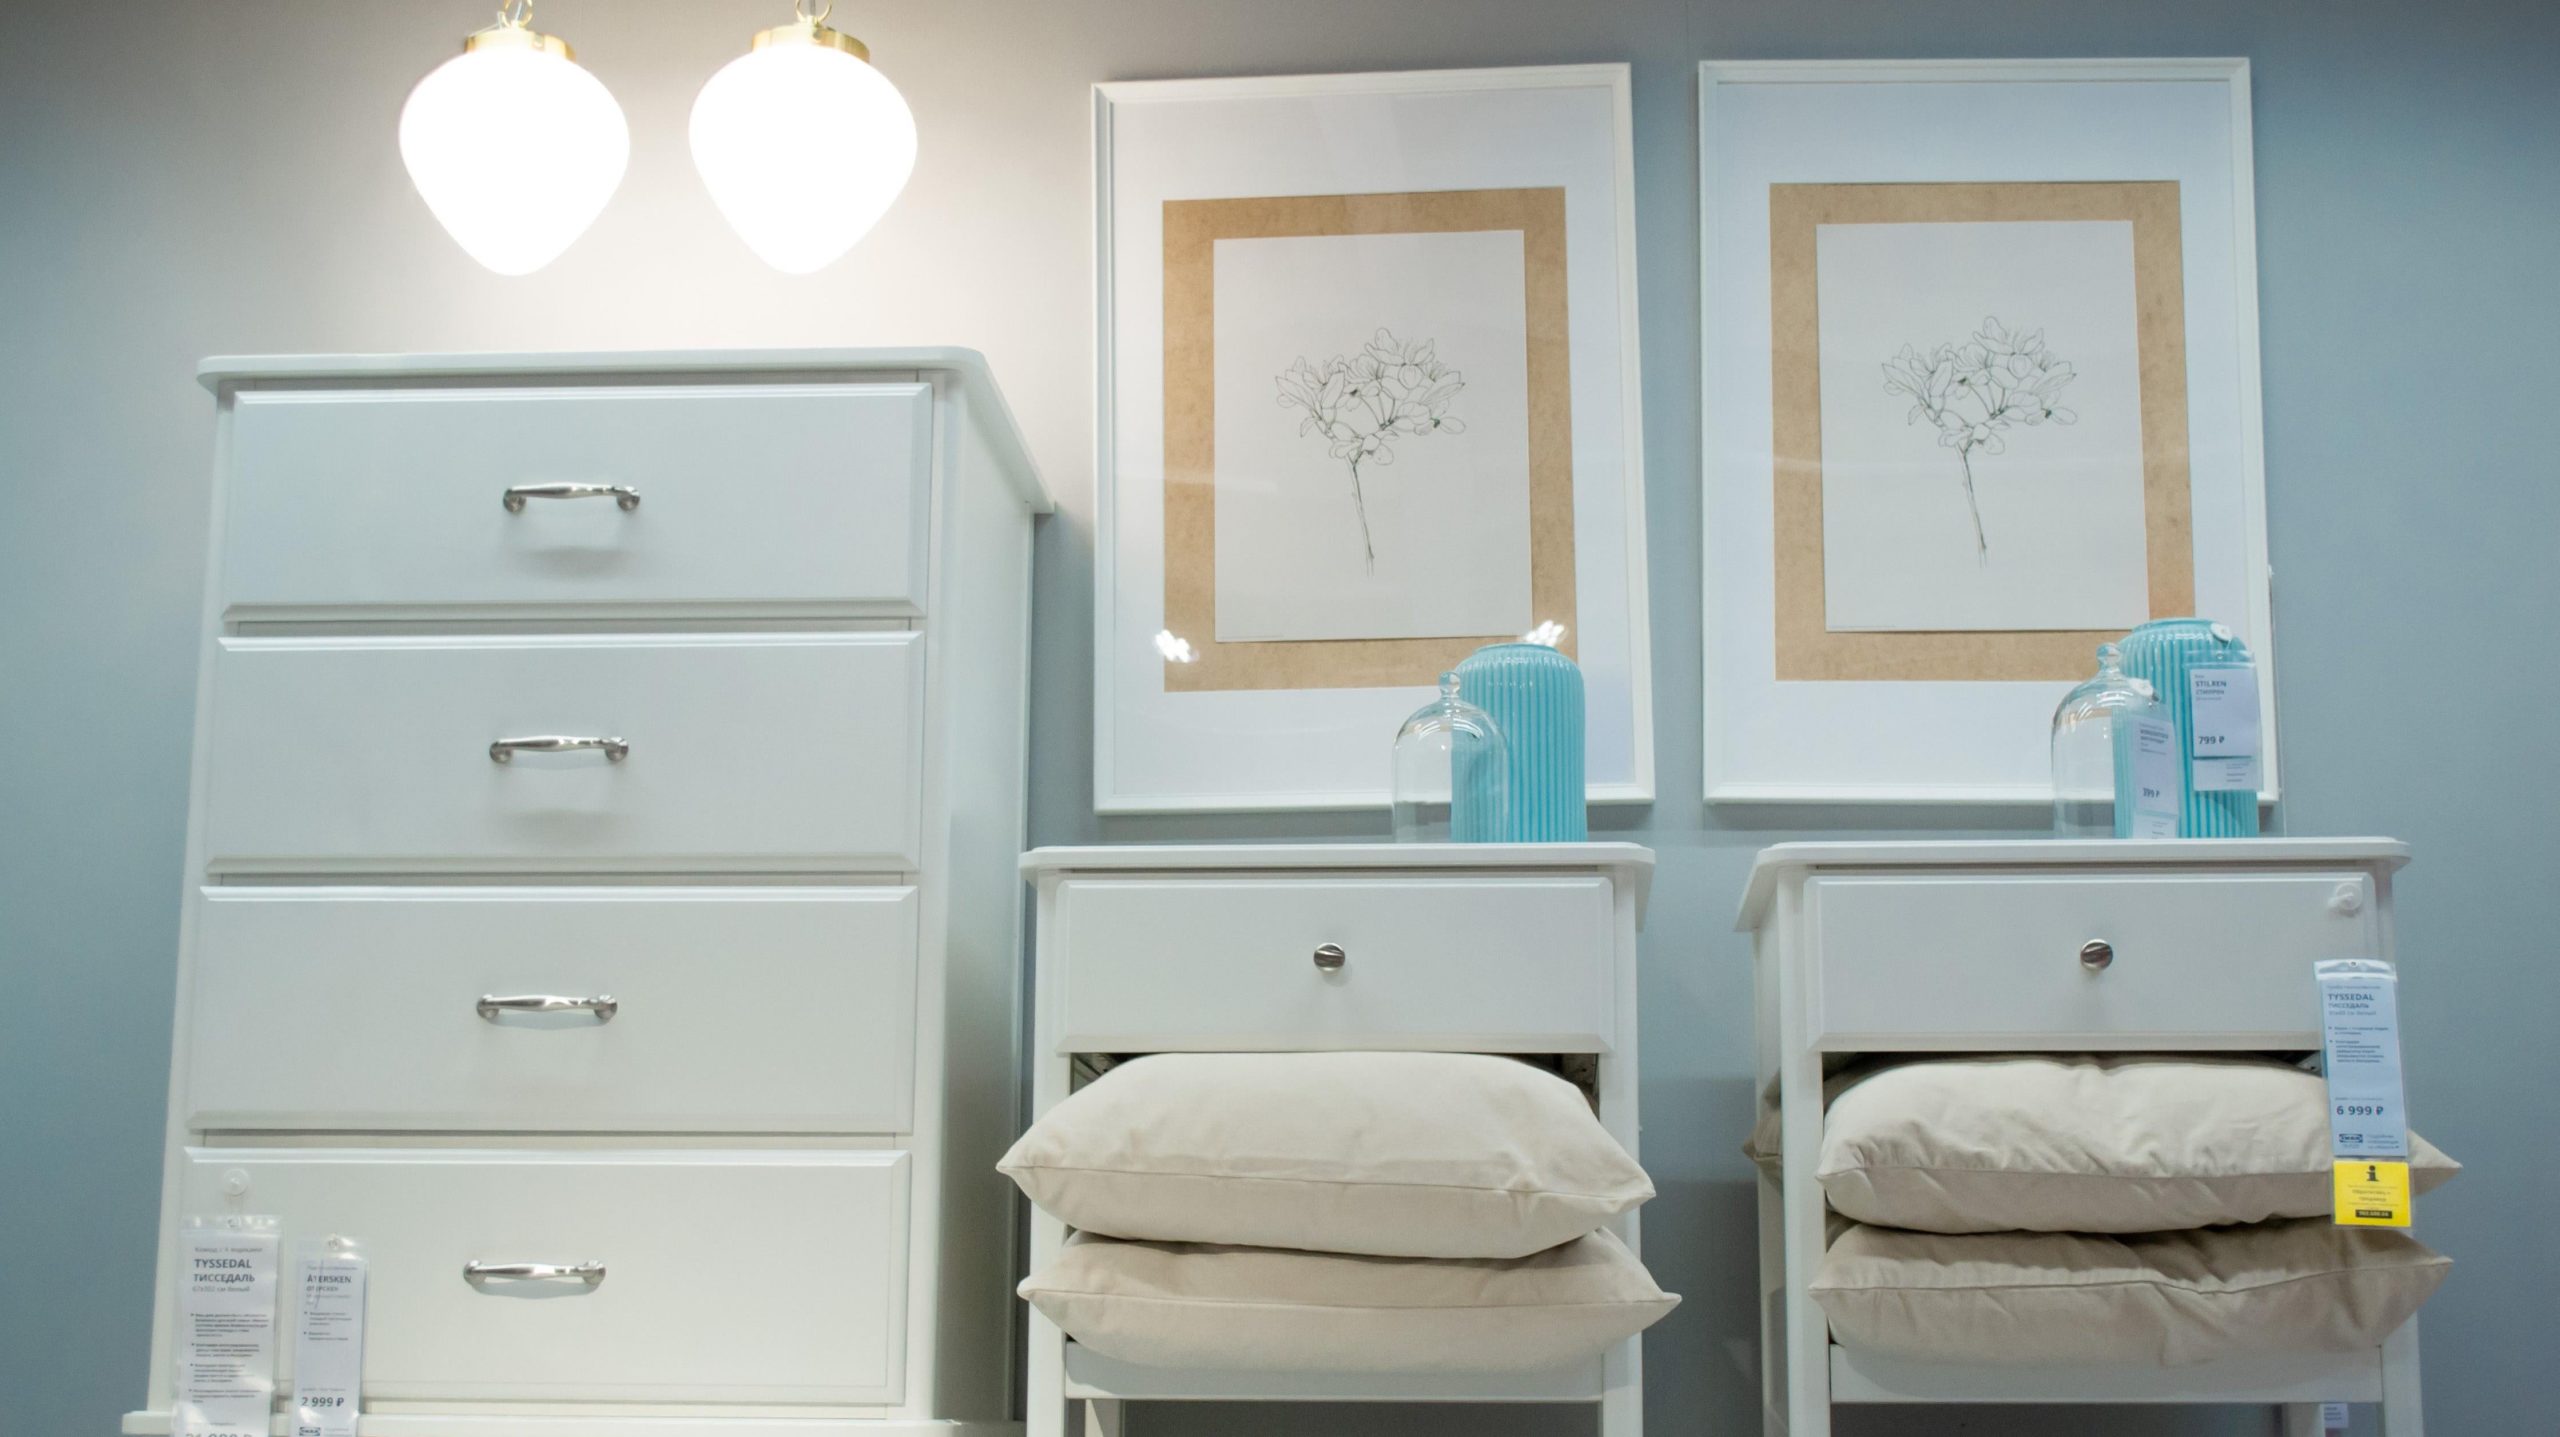 How to Pick the IKEA Furniture That Will Actually Last Decades